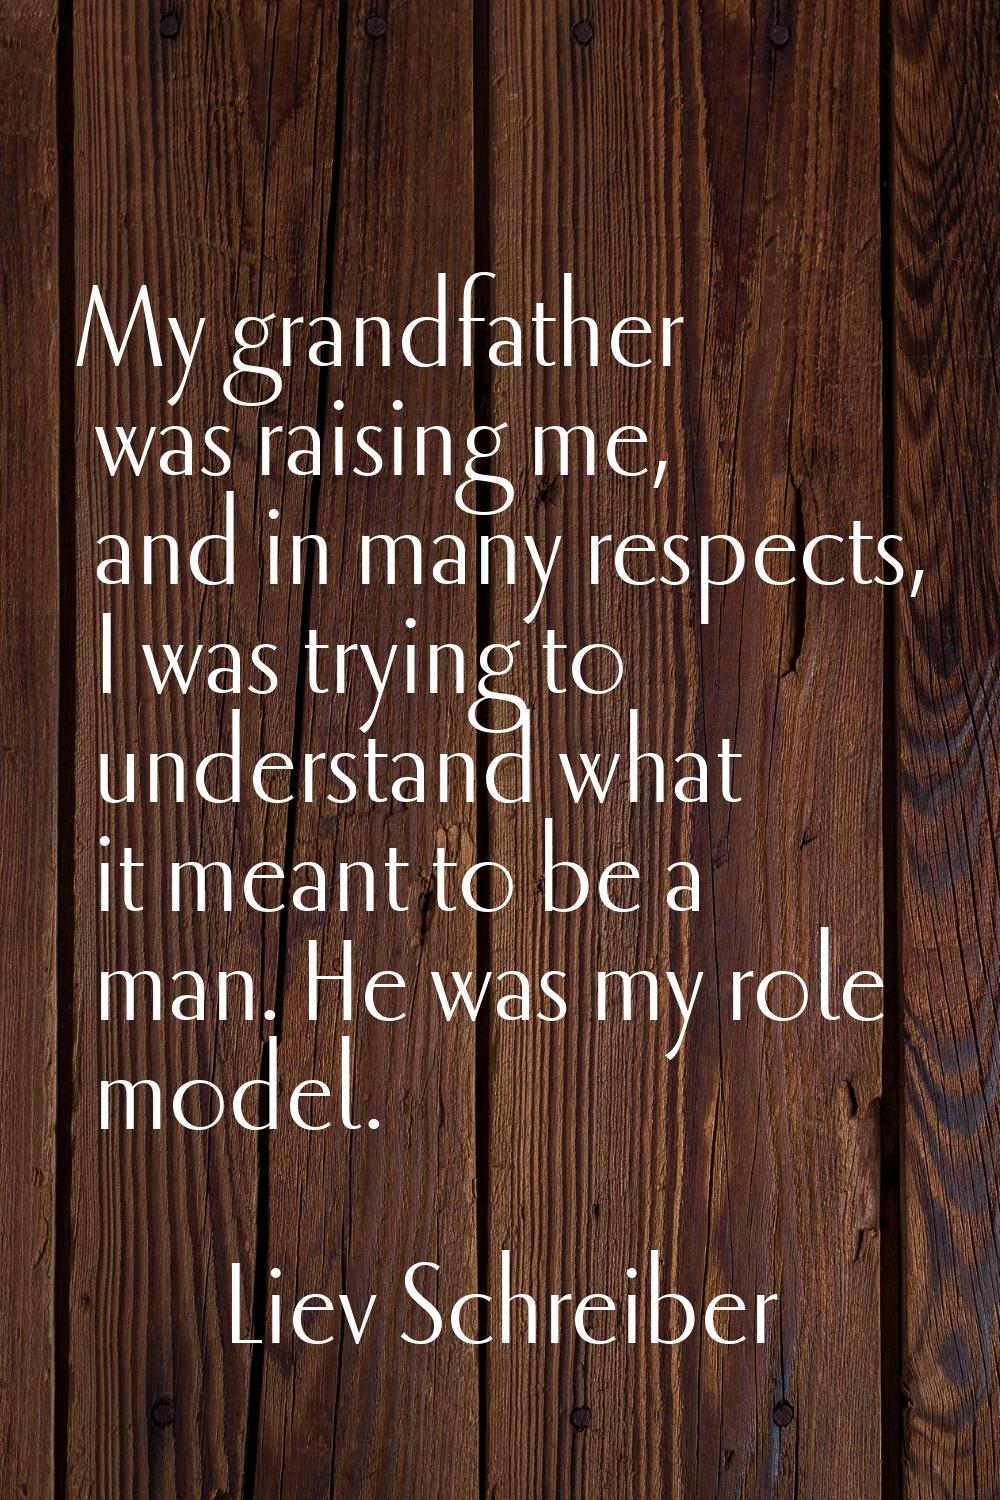 My grandfather was raising me, and in many respects, I was trying to understand what it meant to be